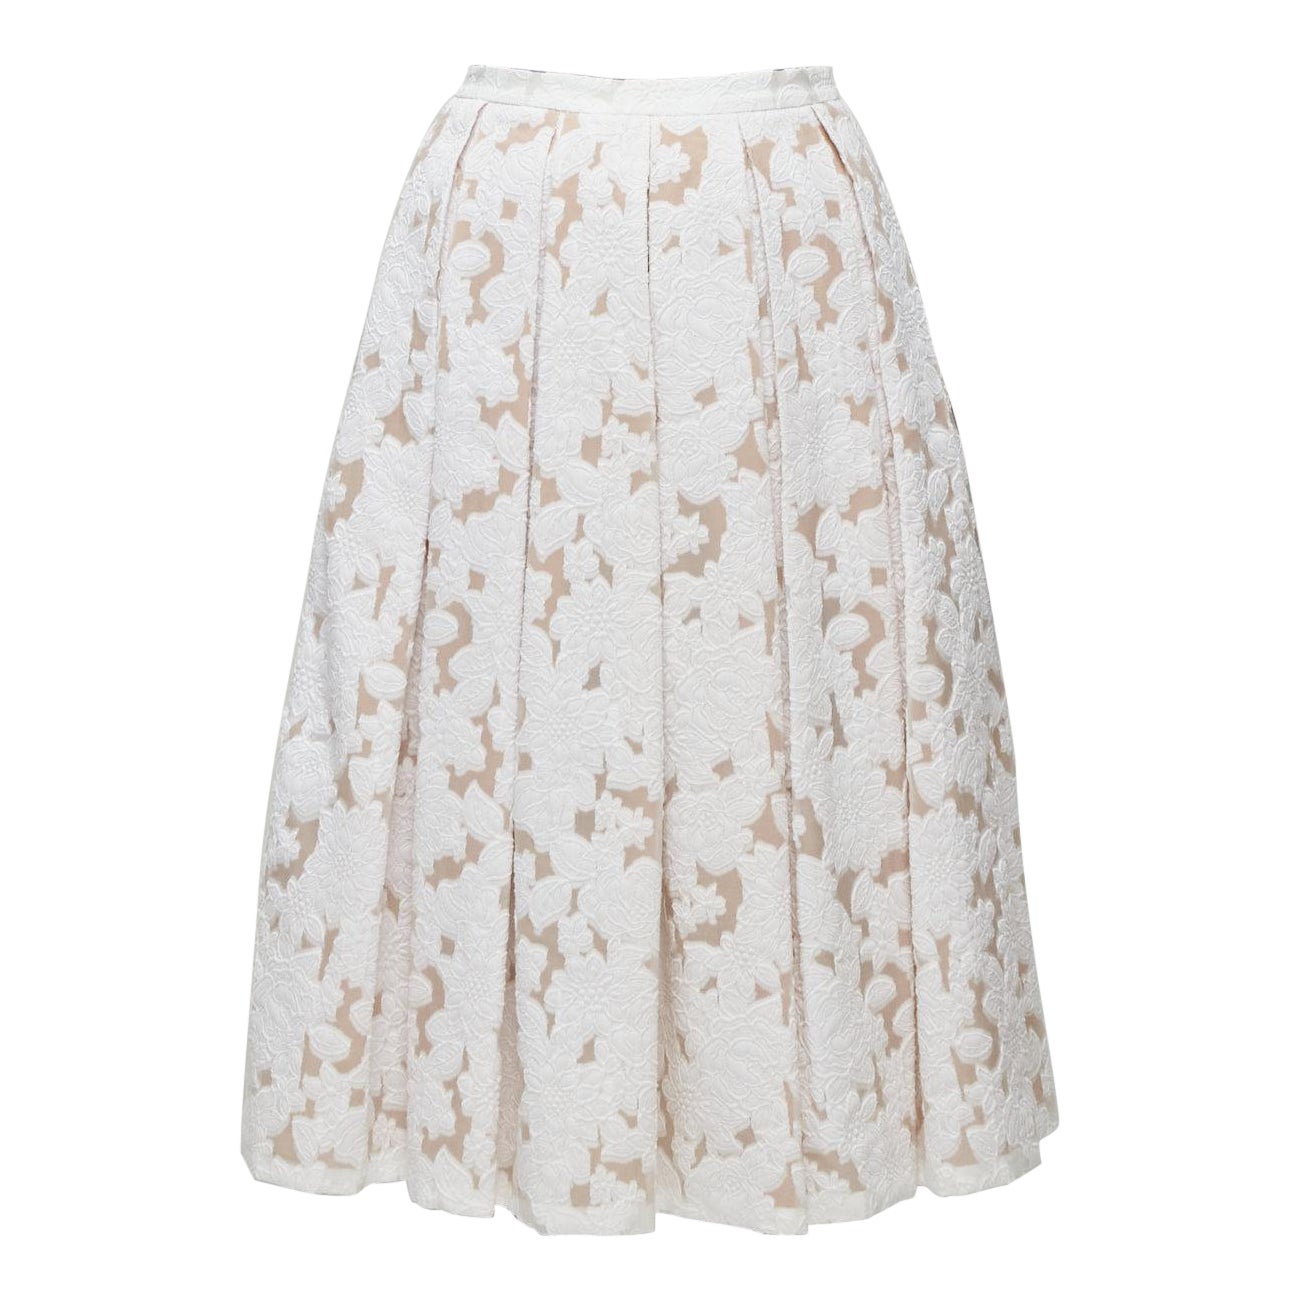 MICHAEL KORS COLLECTION white beige cotton silk floral jacquard skirt US0 XS For Sale